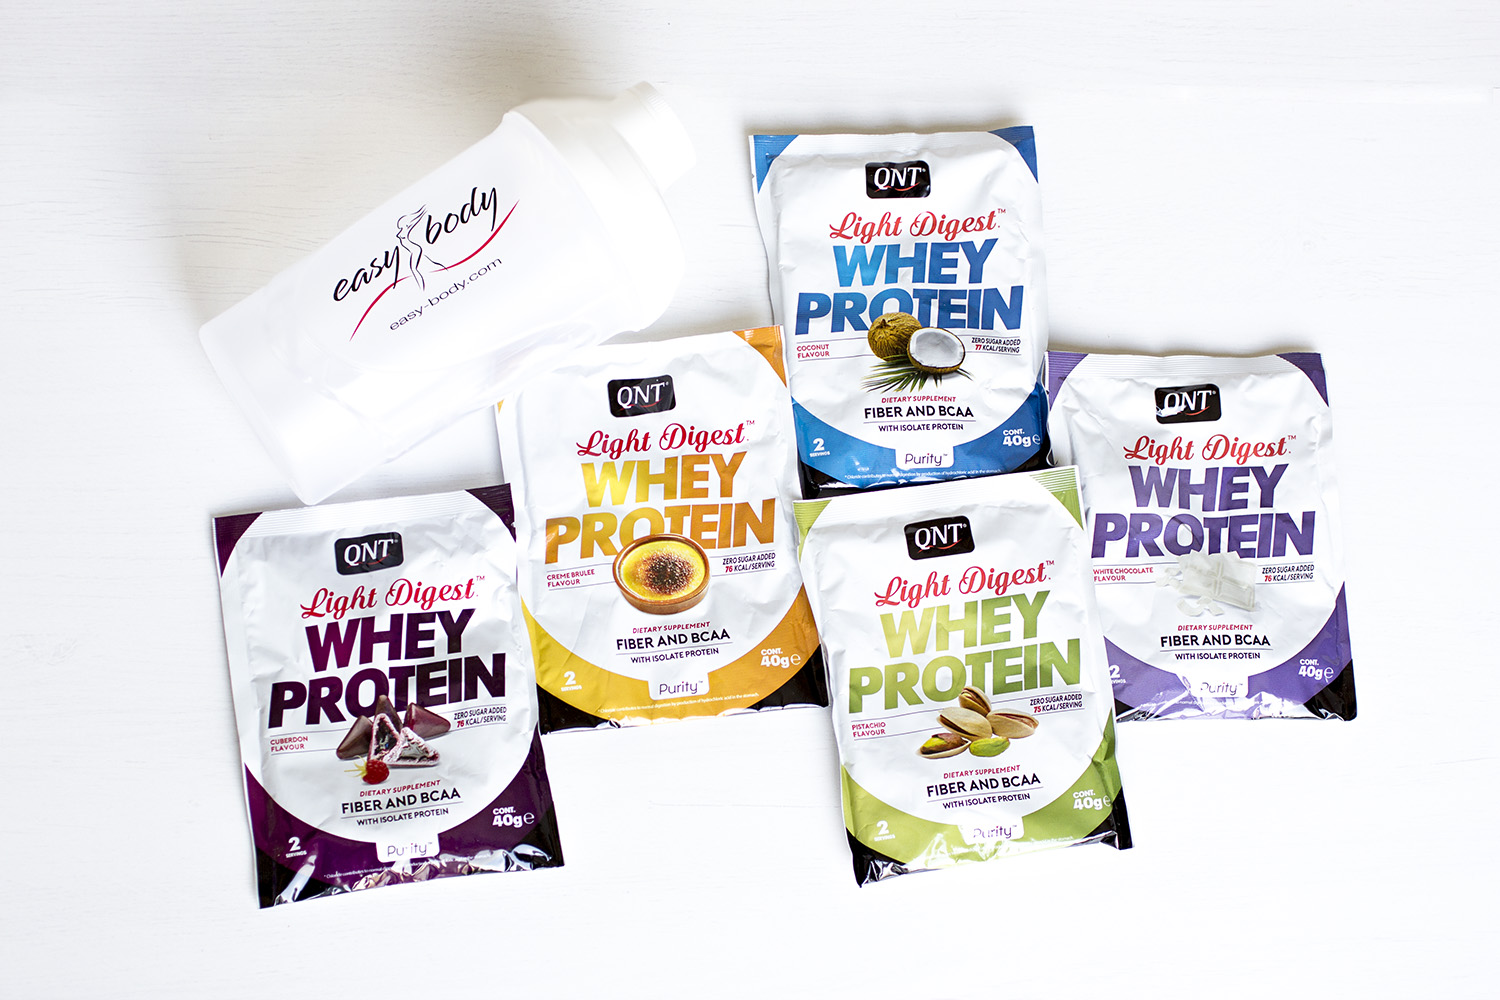 Di Beauty & Care : Light Digest Whey Protein - Qnt